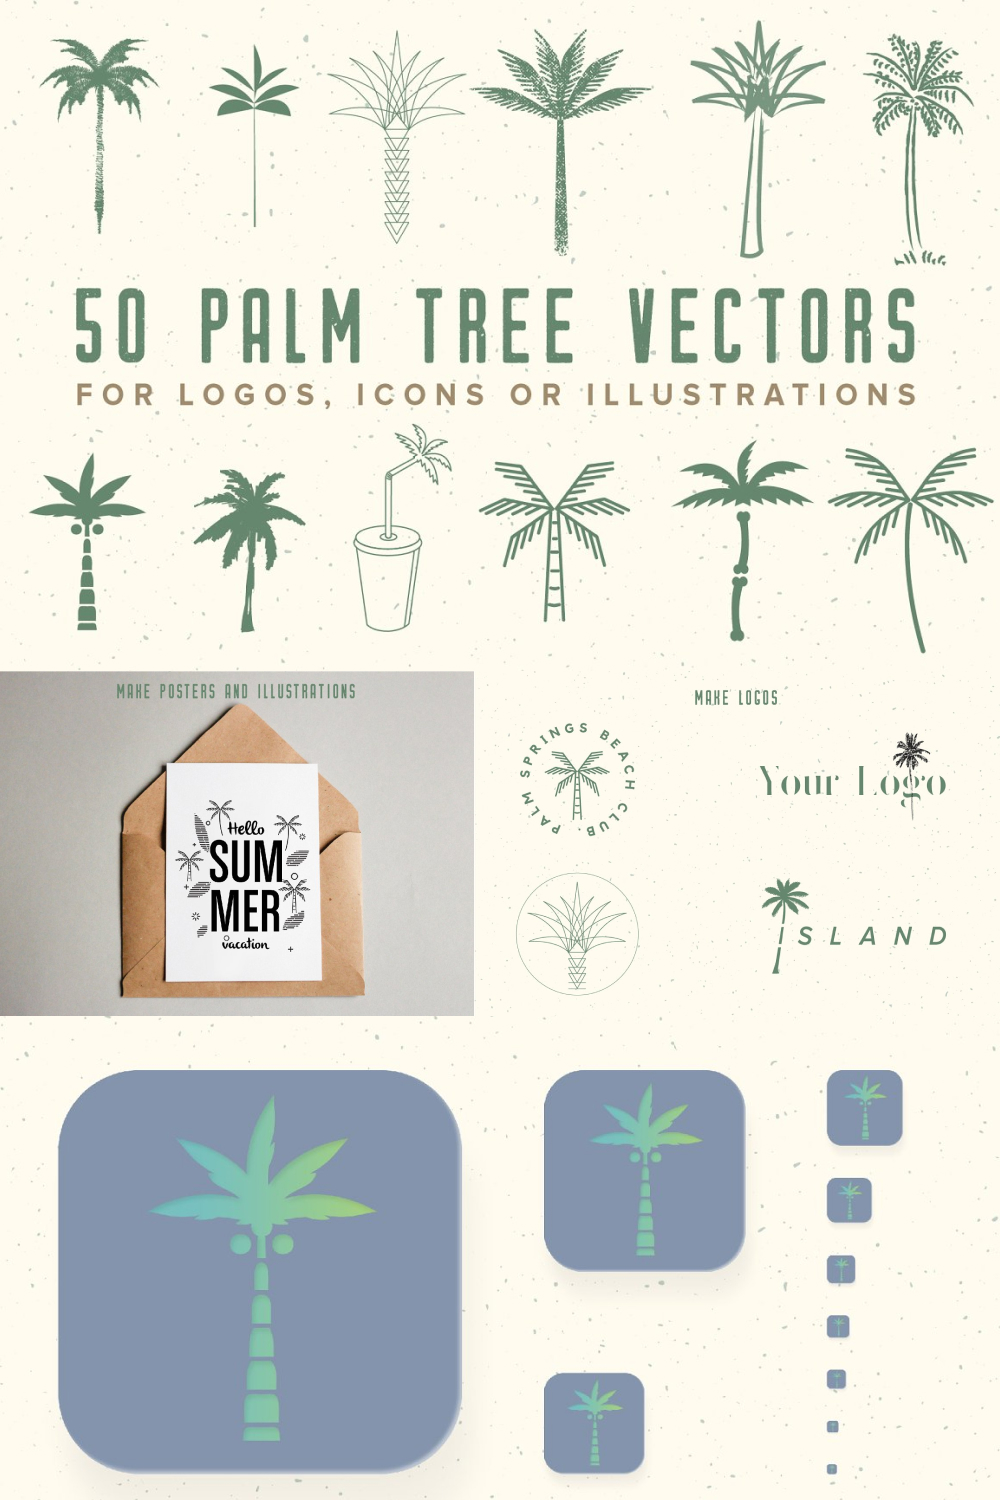 Illustrations palm tree vector logos icons of pinterest.